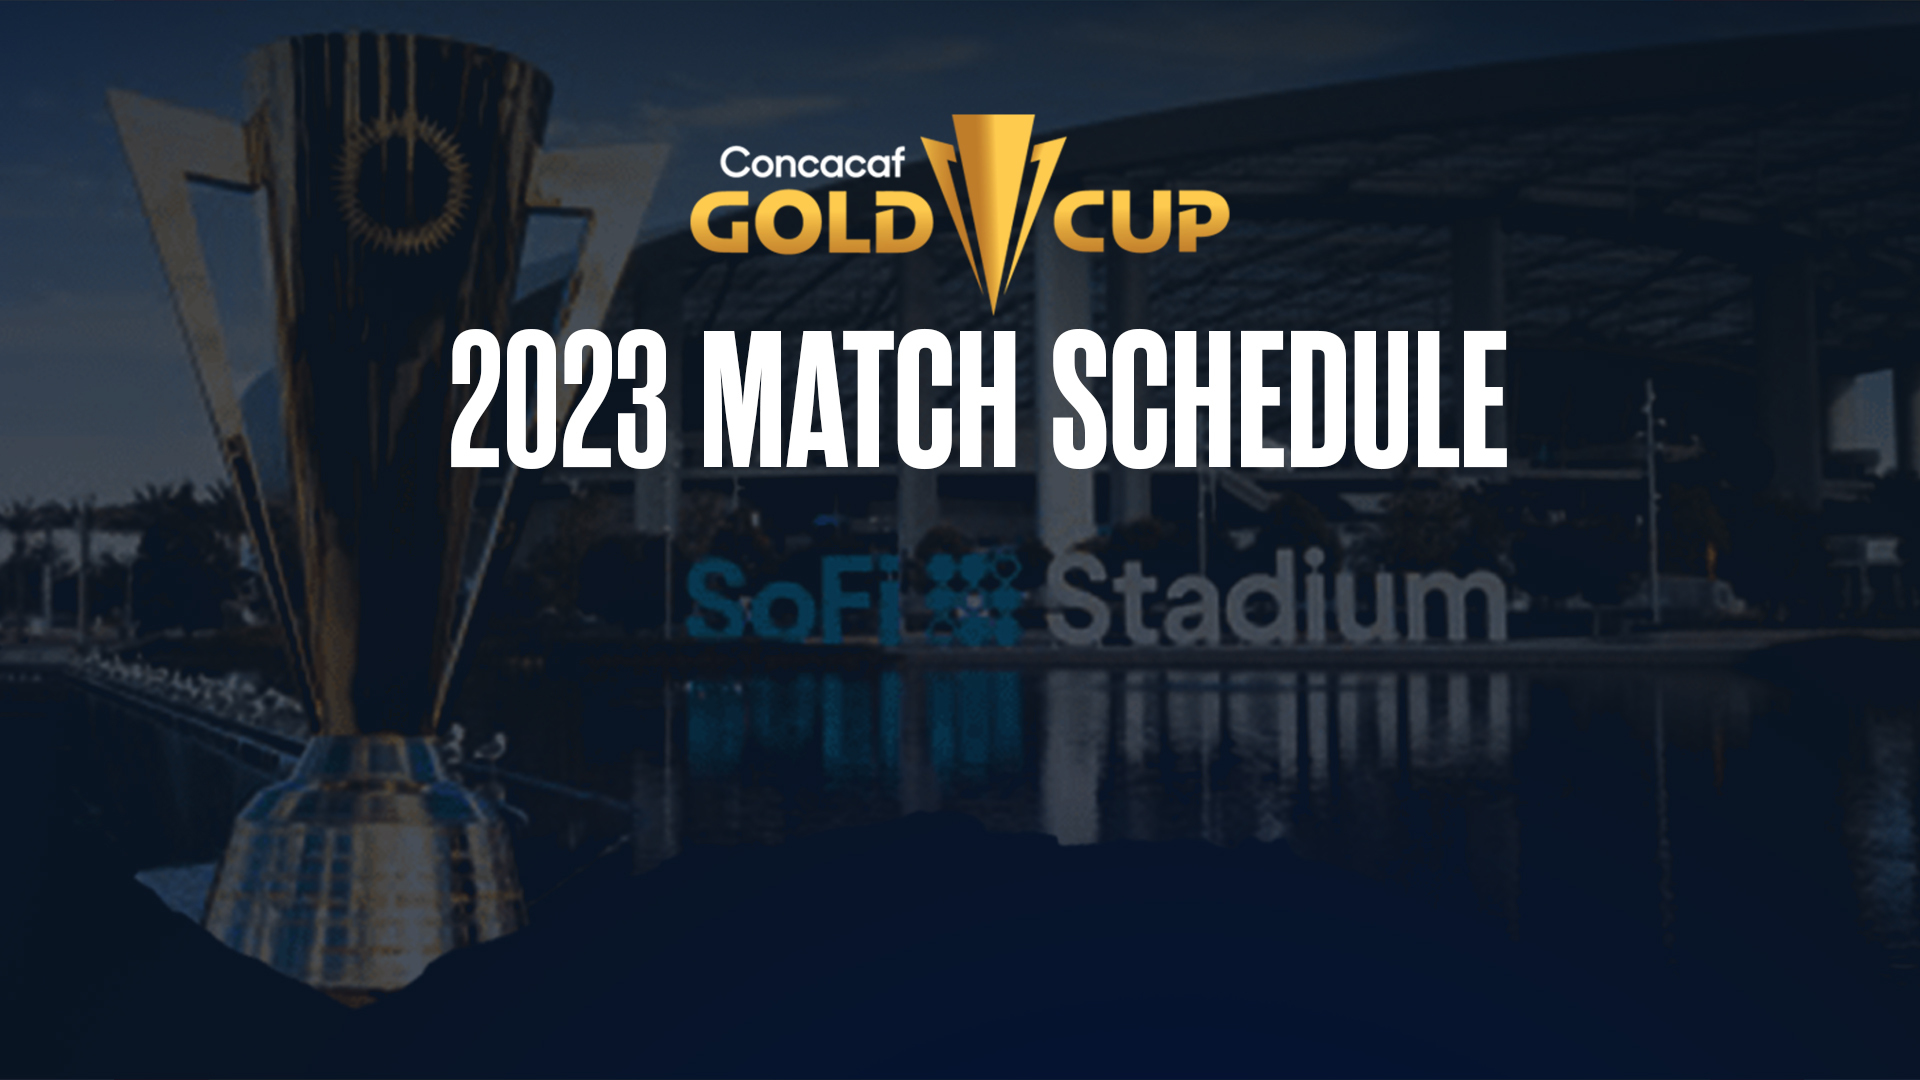 Leagues Cup 2023 kickoff times announced for group stage matches